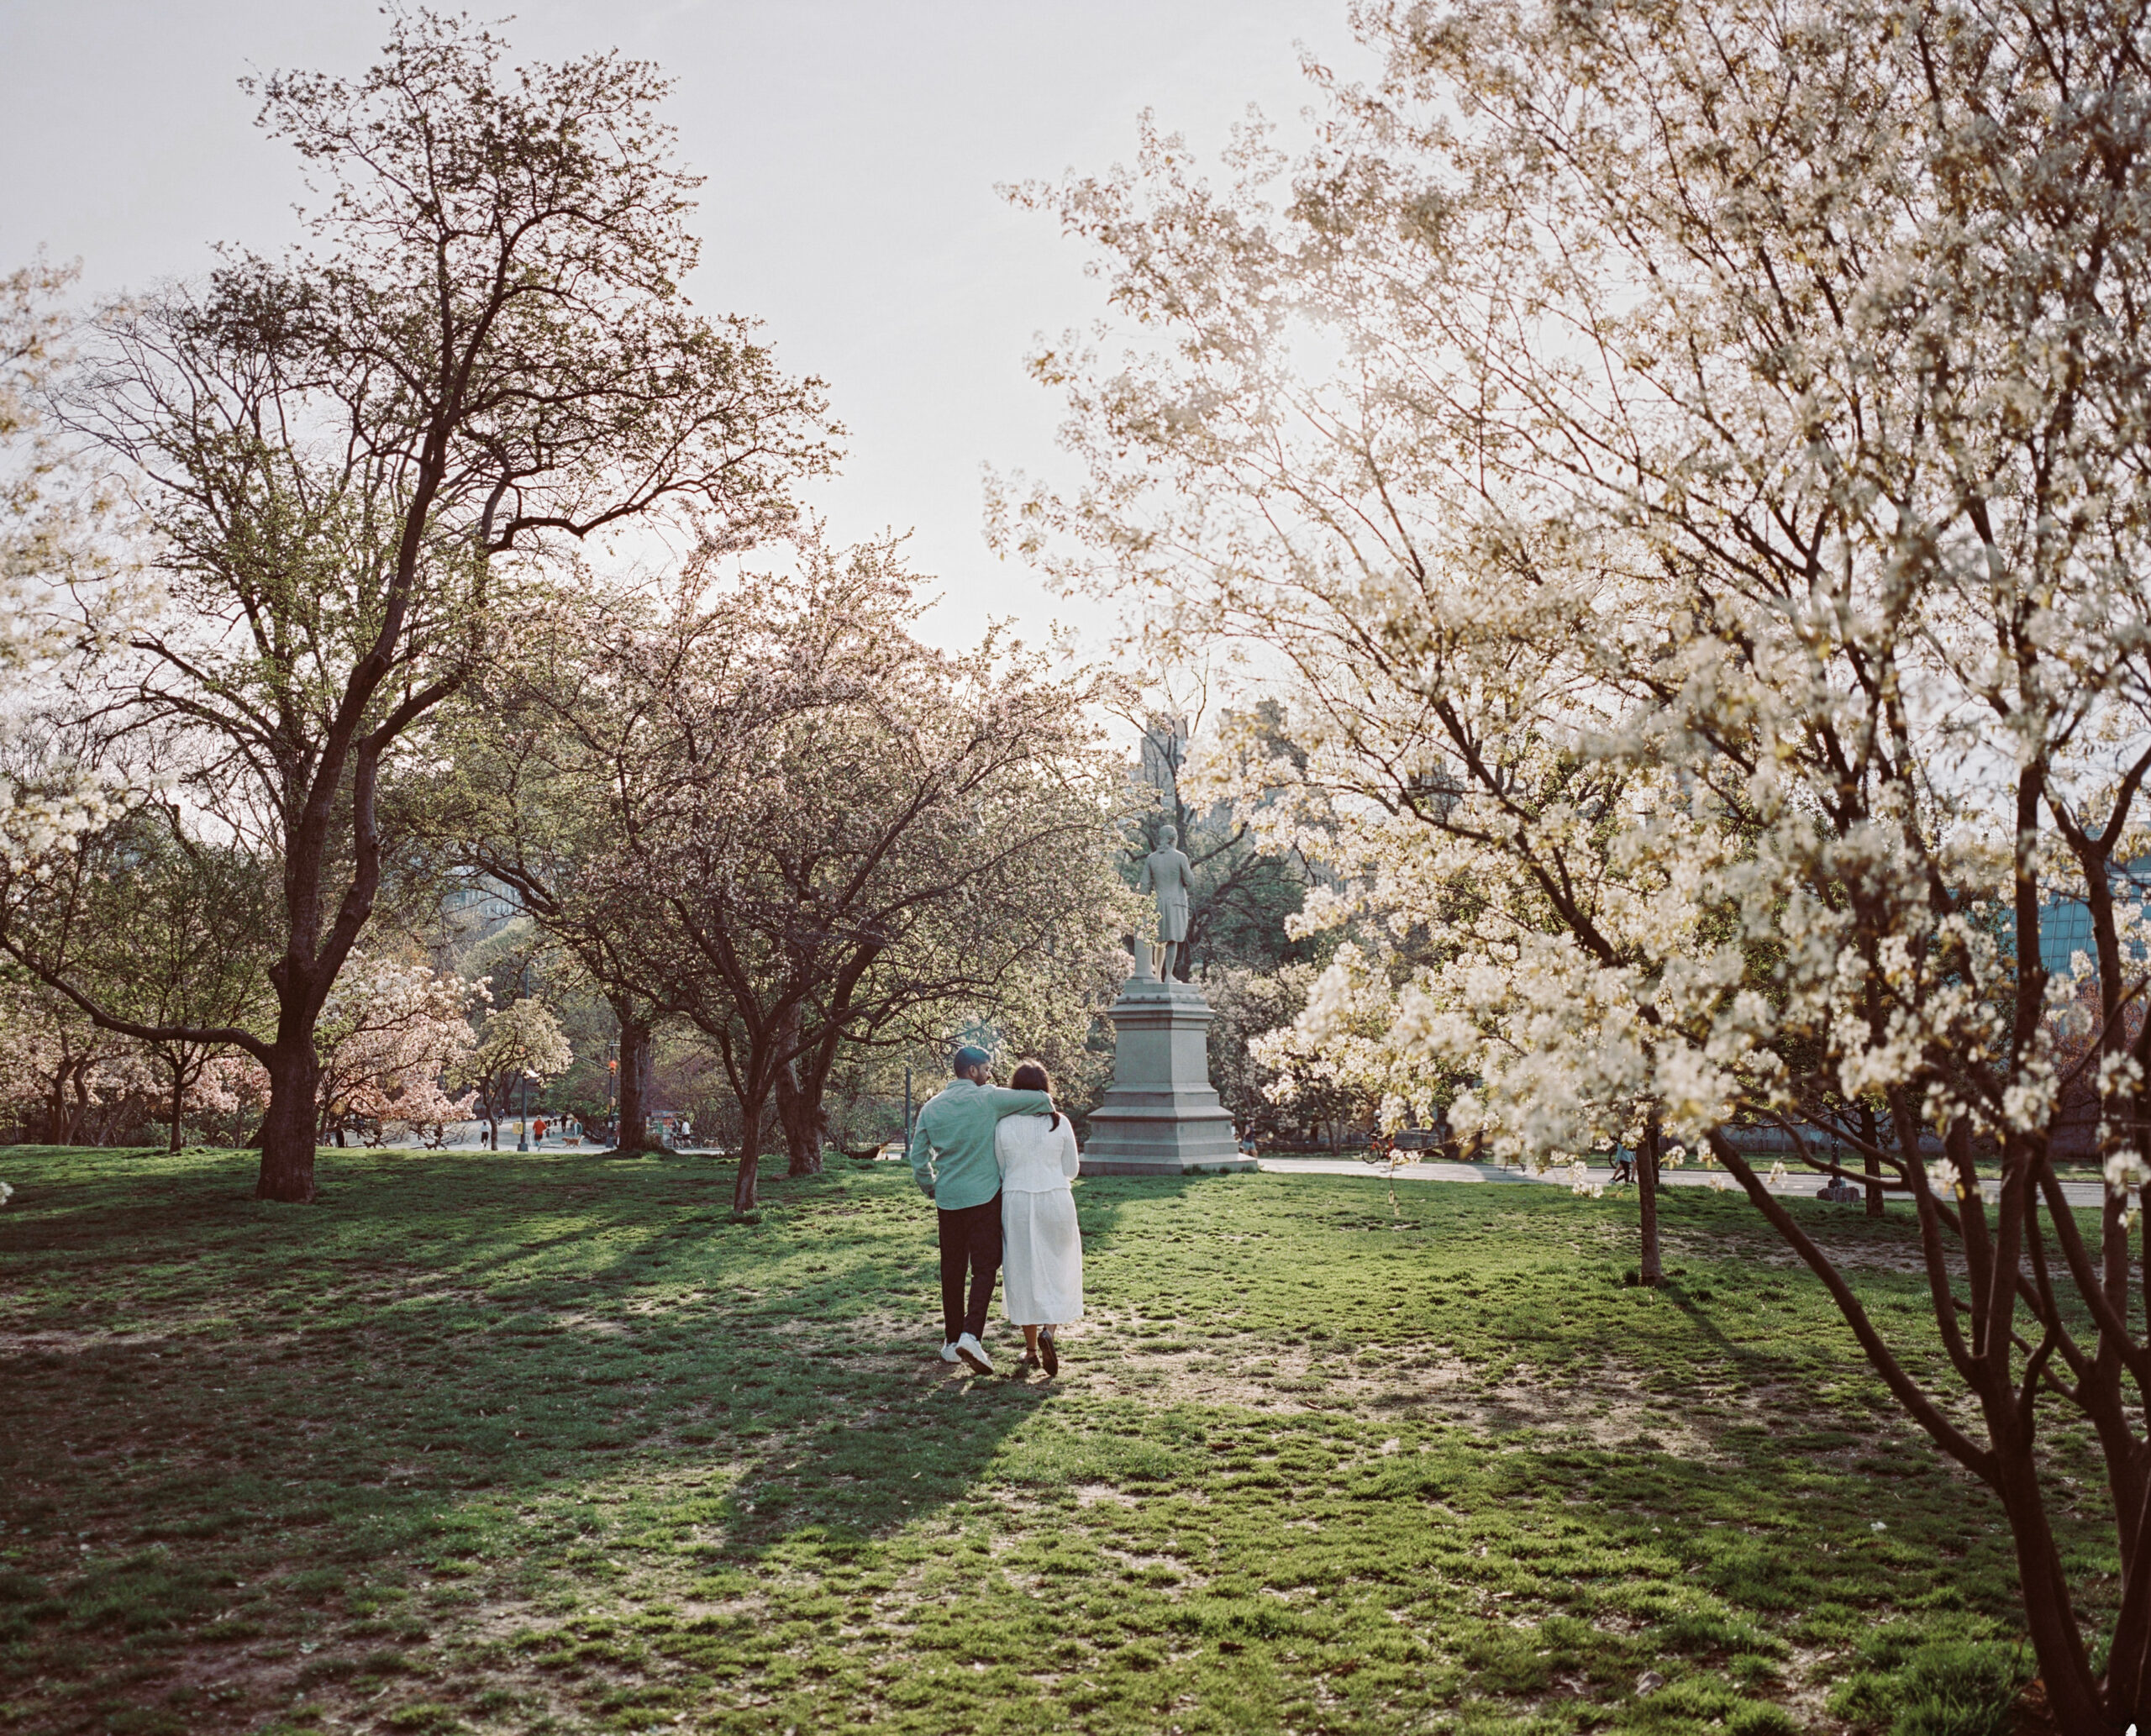 The engaged couple is walking in the middle of Central Park in spring, with cherry blossom trees around them. Image by Jenny Fu Studio